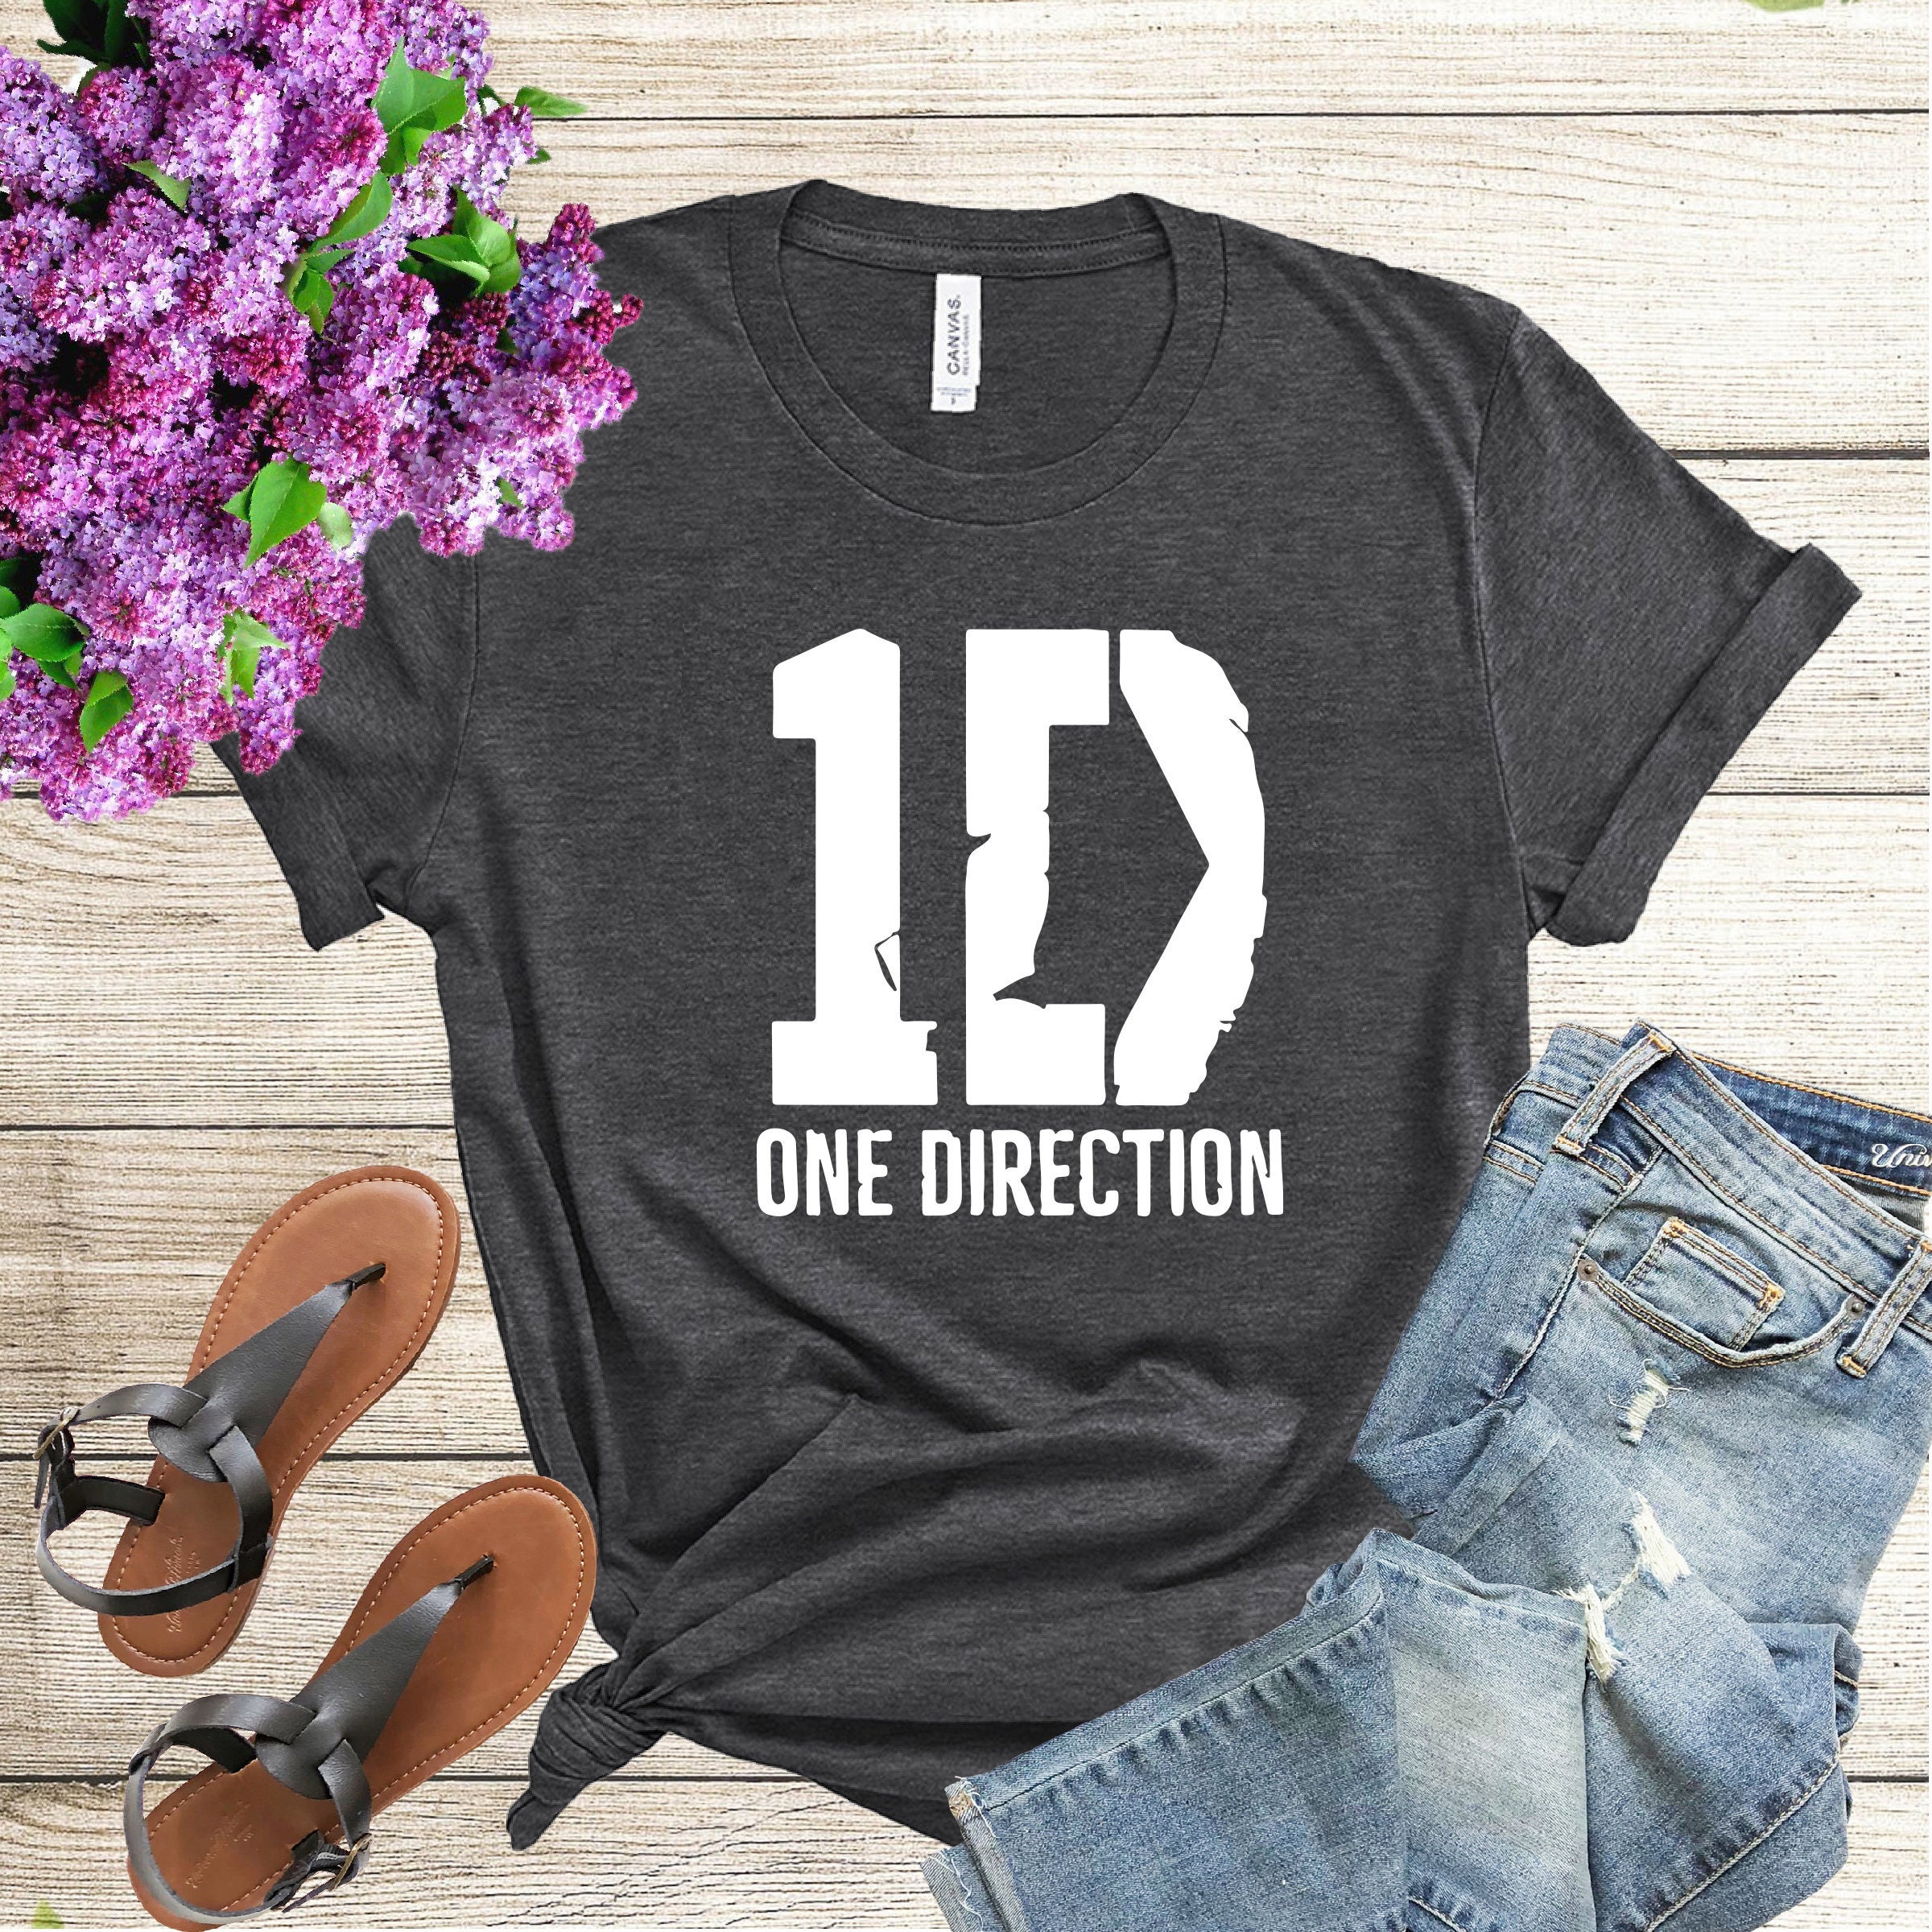 One Direction Shirt 